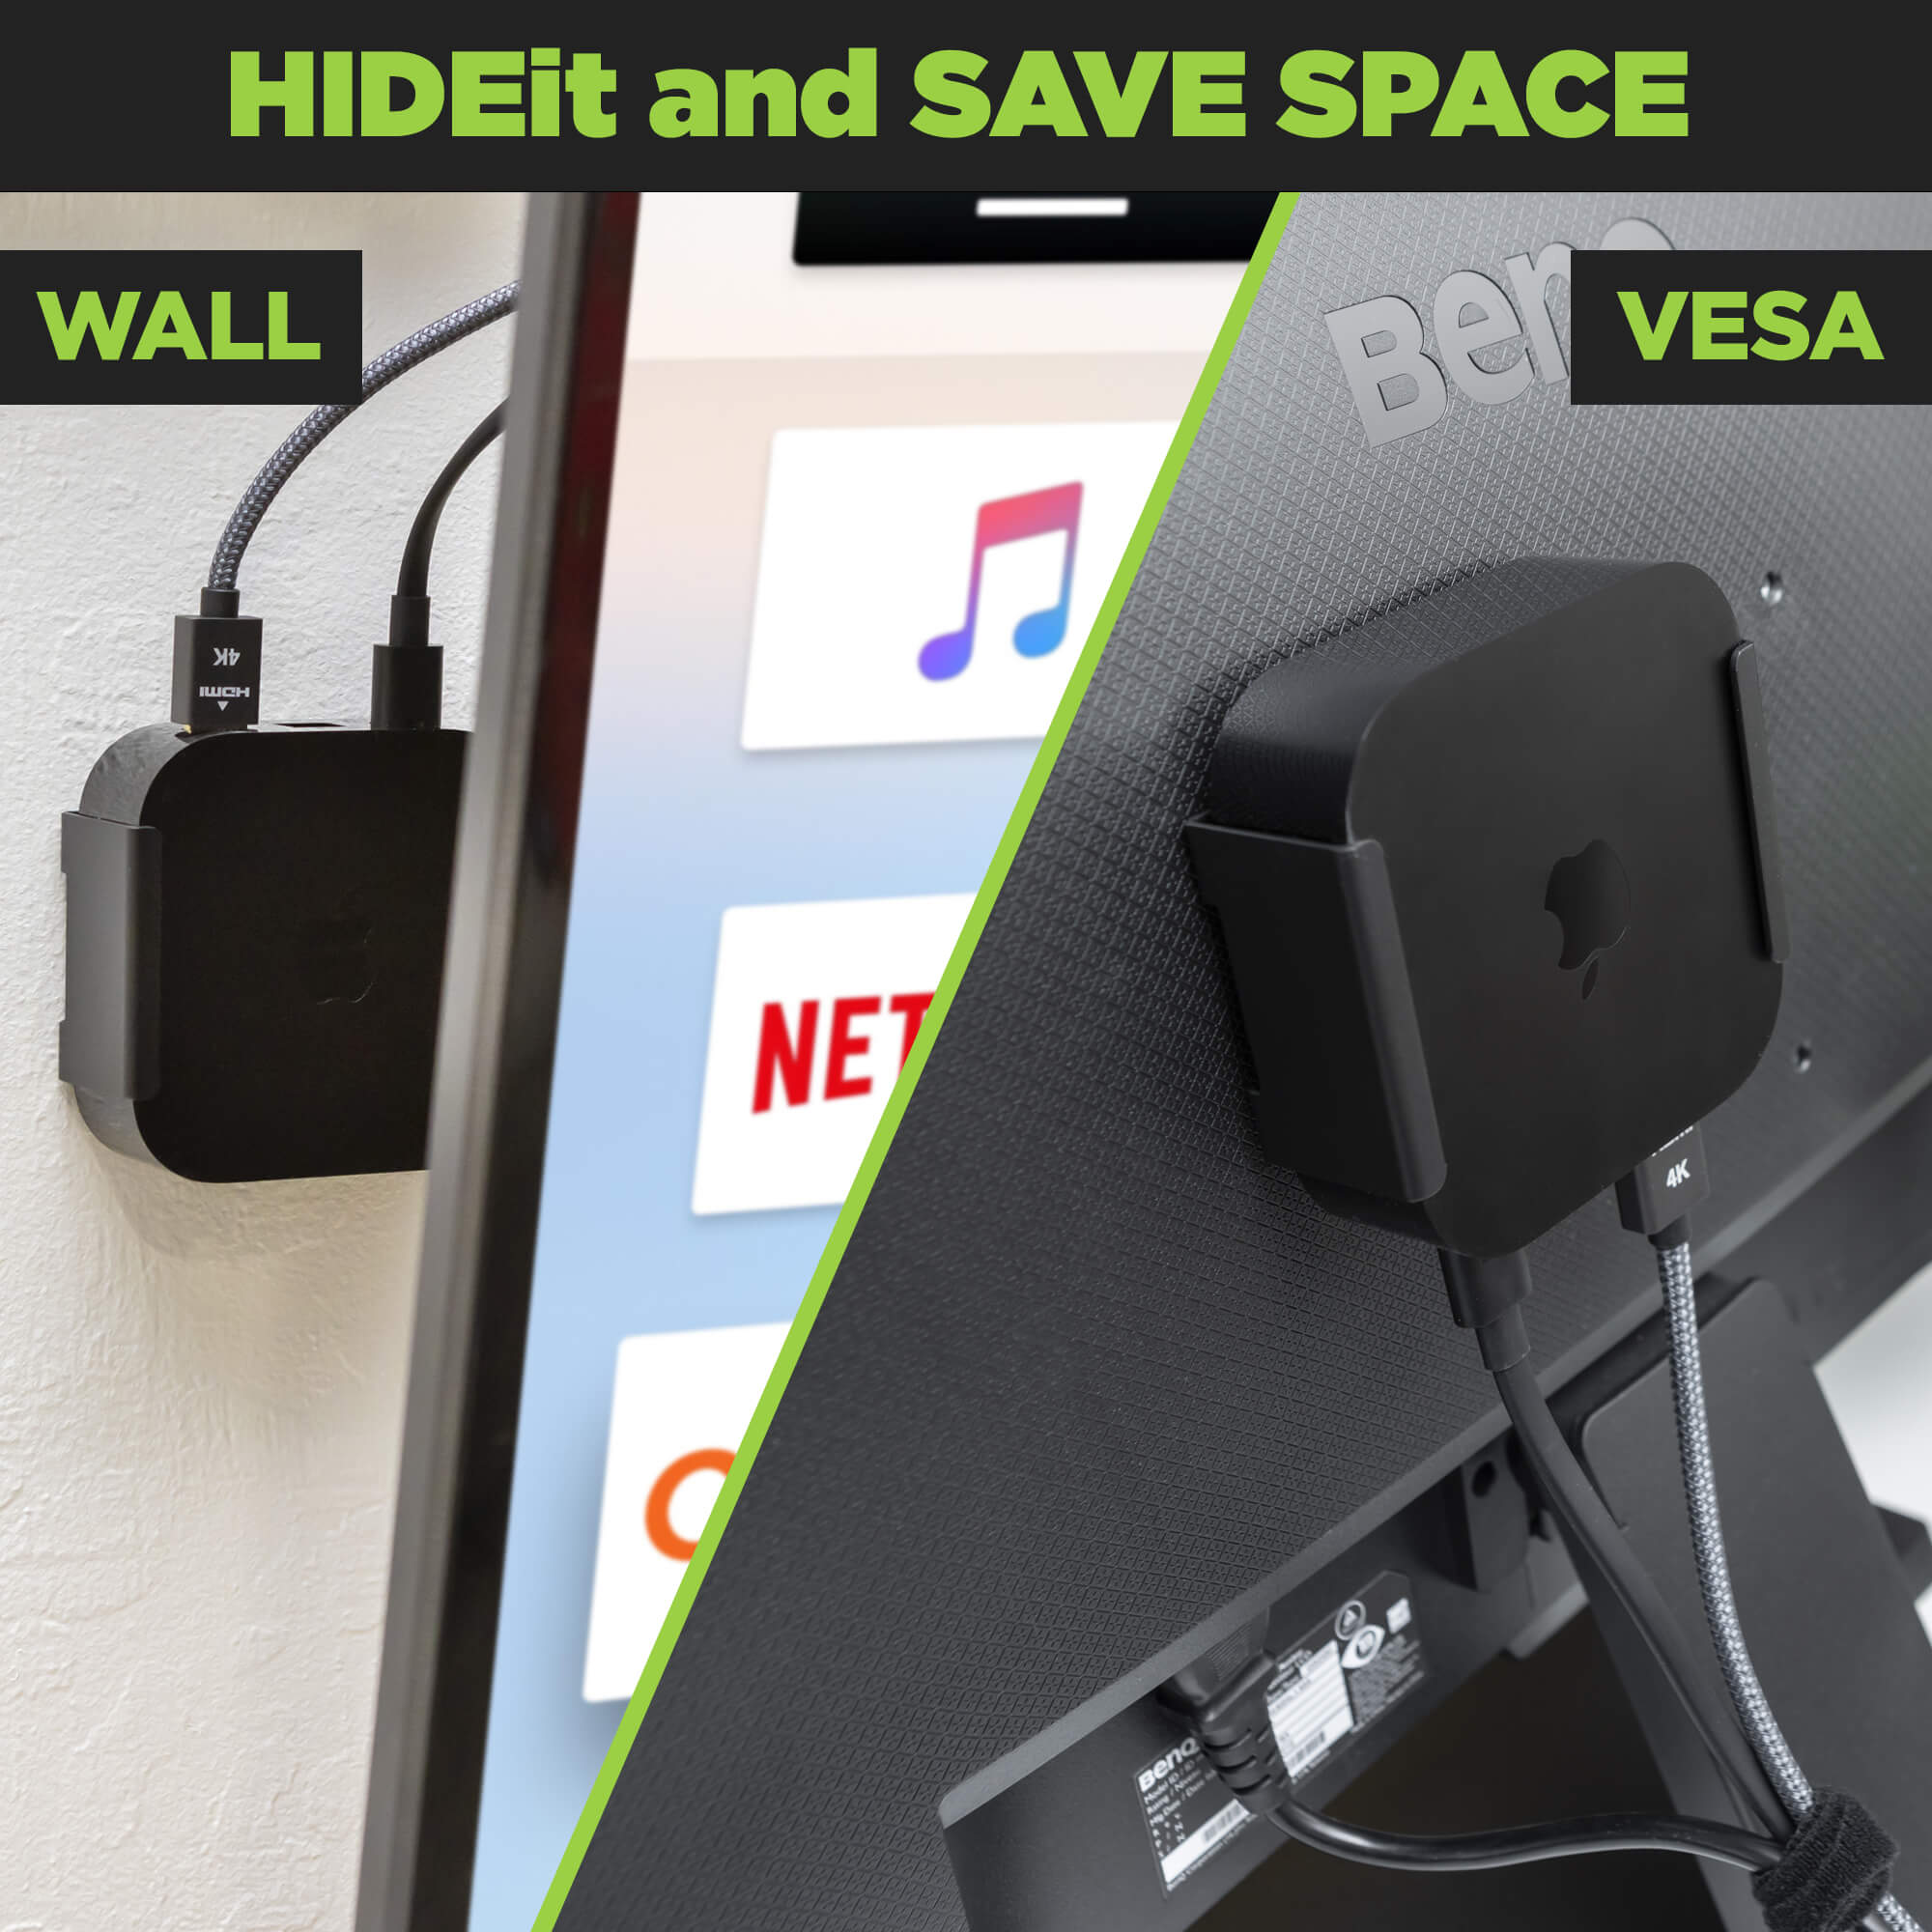 With the HIDEit Apple TV 4K Mount you can mount your 3rd Generation Apple TV 4K on the wall behind your TV or VESA mount it to the back of your TV.